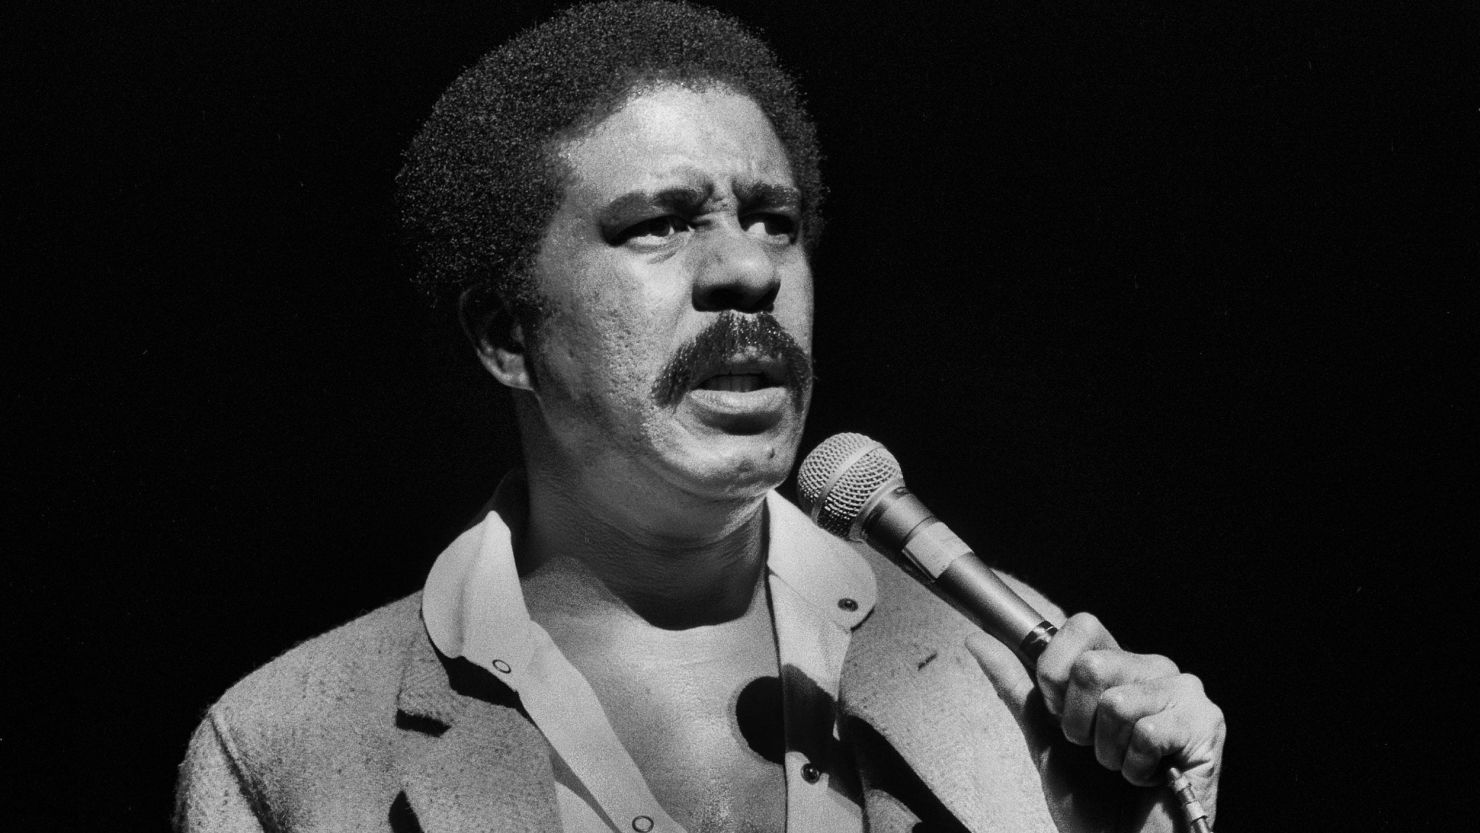 Richard Pryor performing on stage in Chicago as seen in 'Right to Offend: The Black Comedy Revolution.'